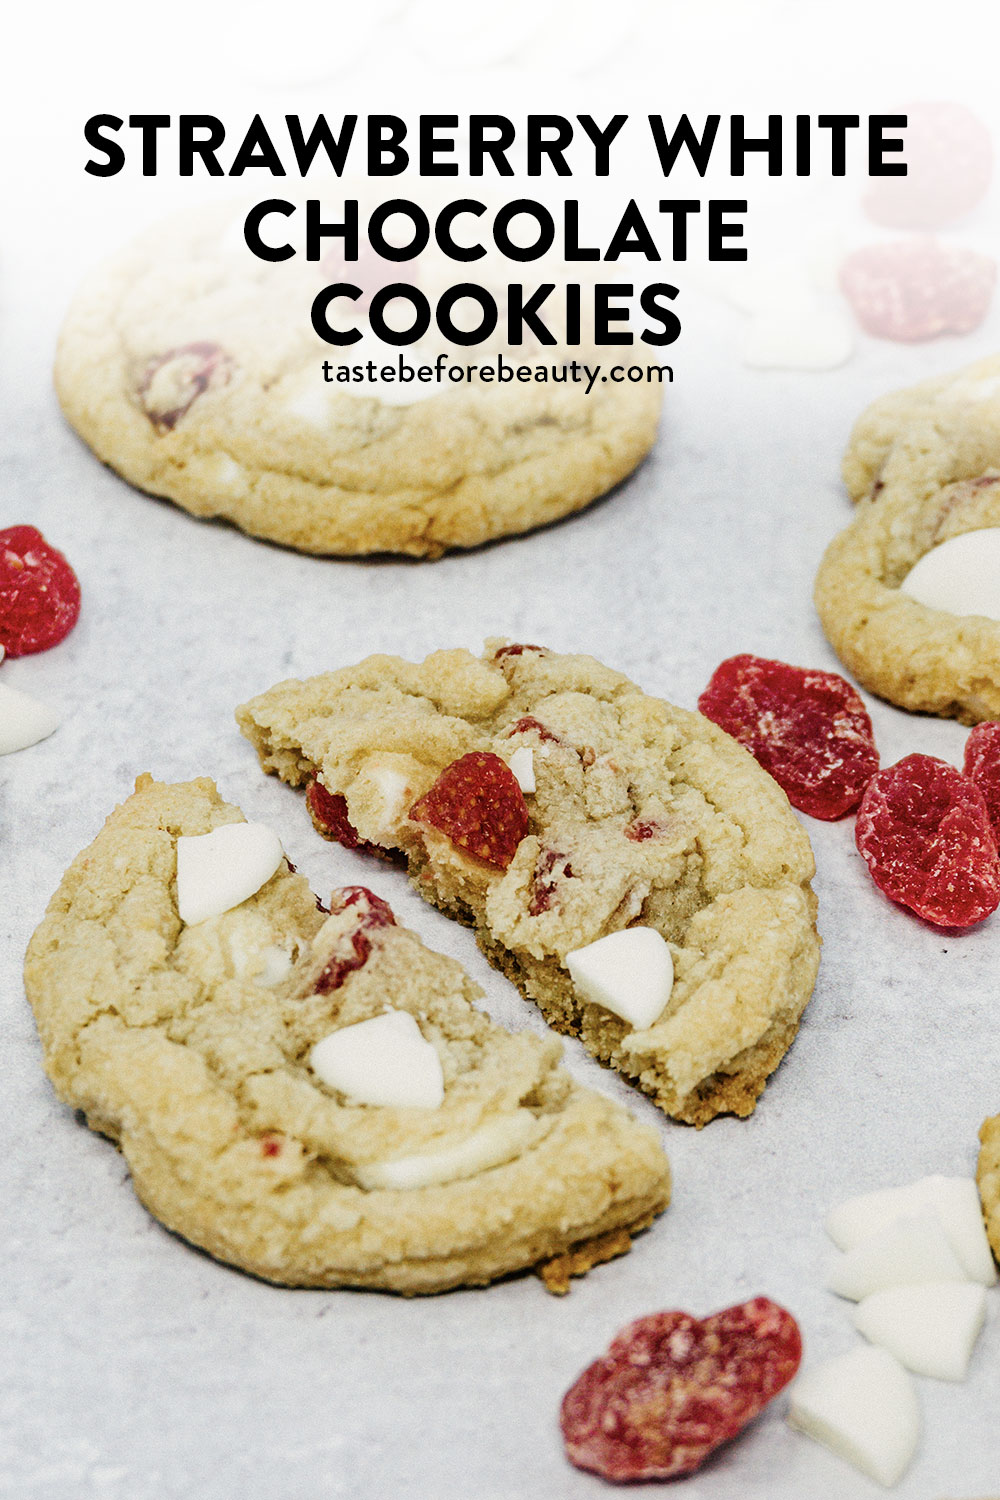 taste before beauty strawberry white chocolate cookies split open on table pinterest pin